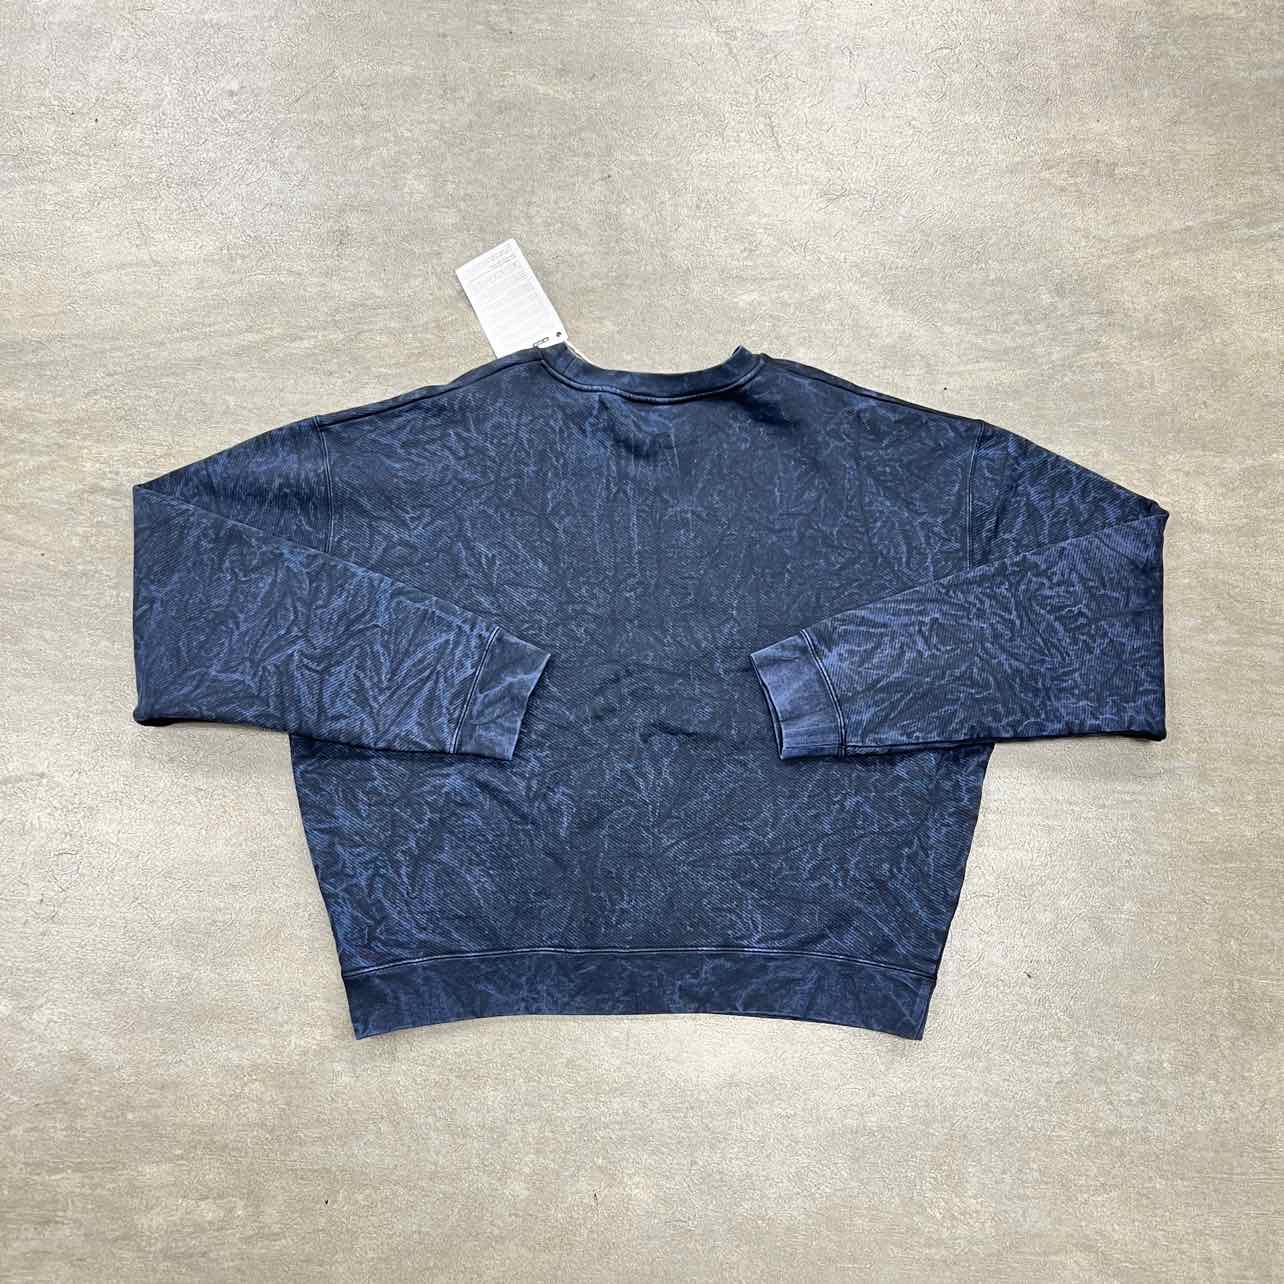 OFF-WHITE Crewneck Sweater "MARBLE" Blue Used Size 2XL